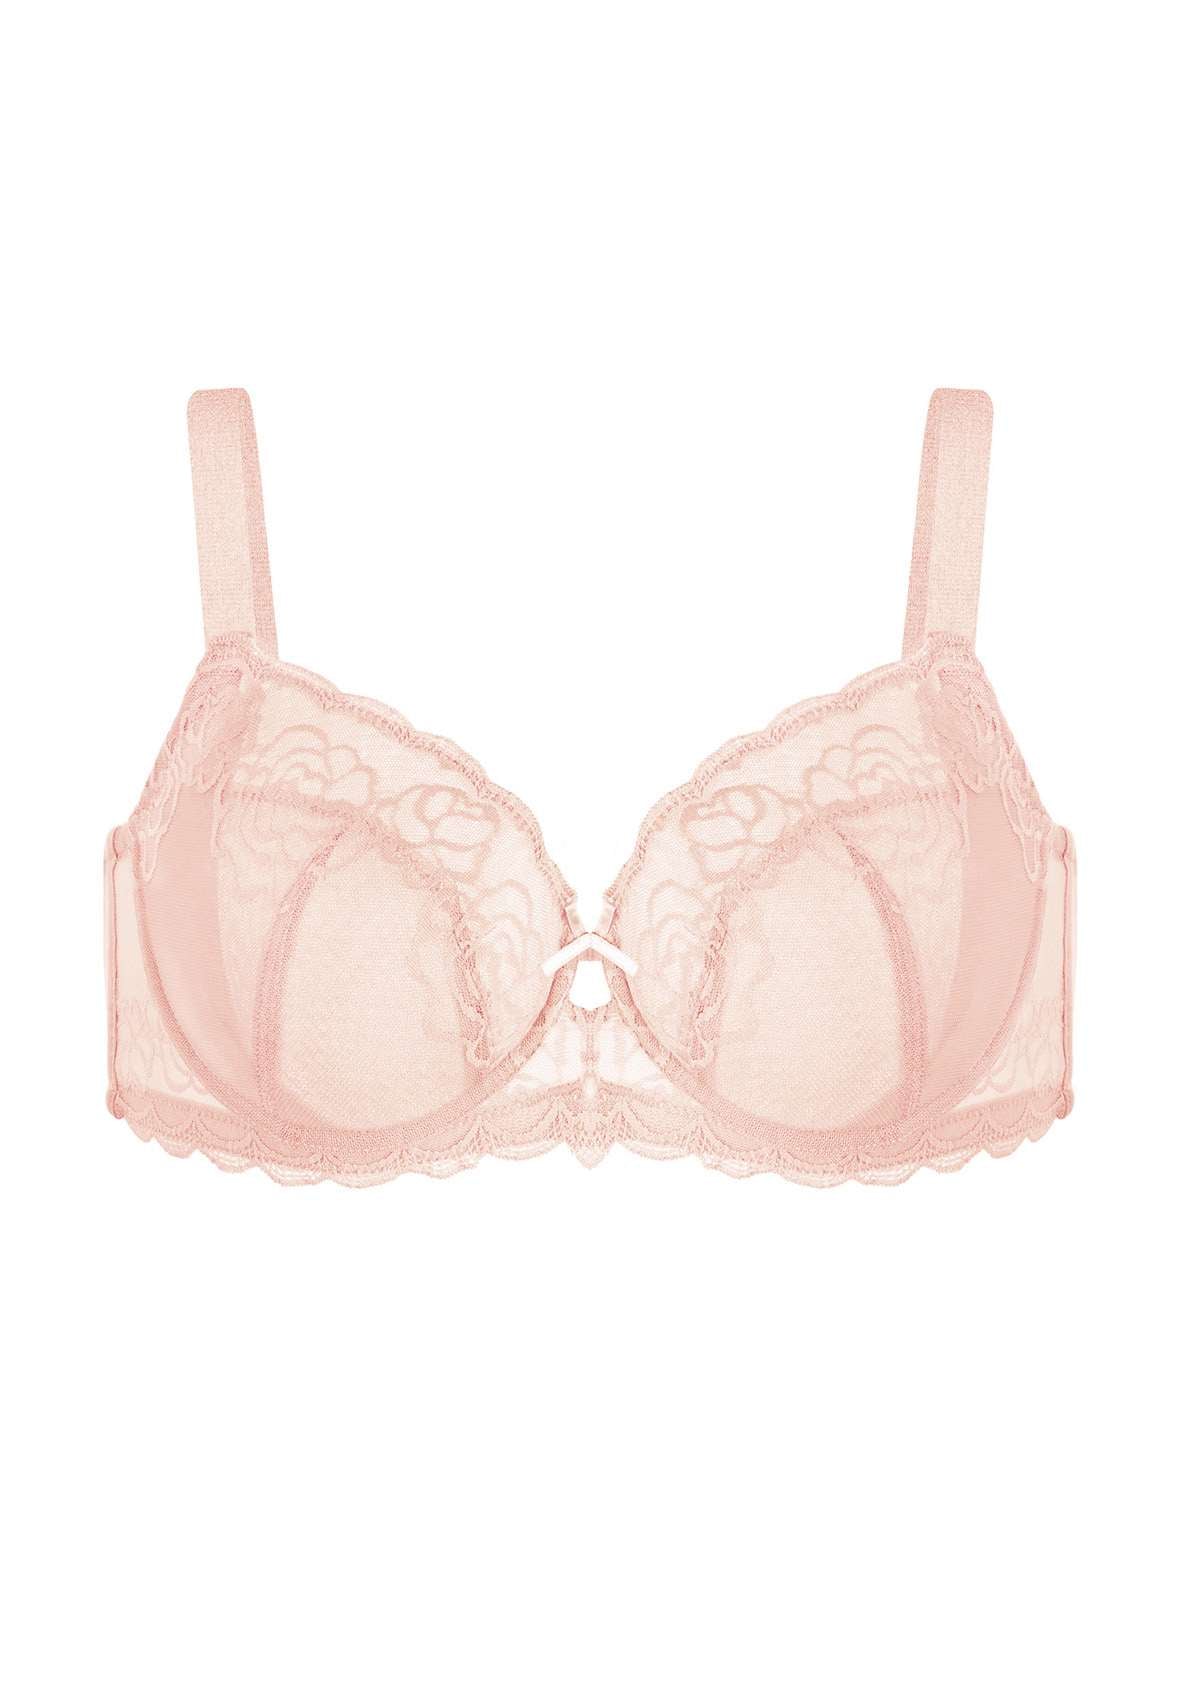 HSIA Rosa Bonica Sheer Lace Mesh Unlined Thin Comfy Woman Bra - Pink / 38 / DDD/F